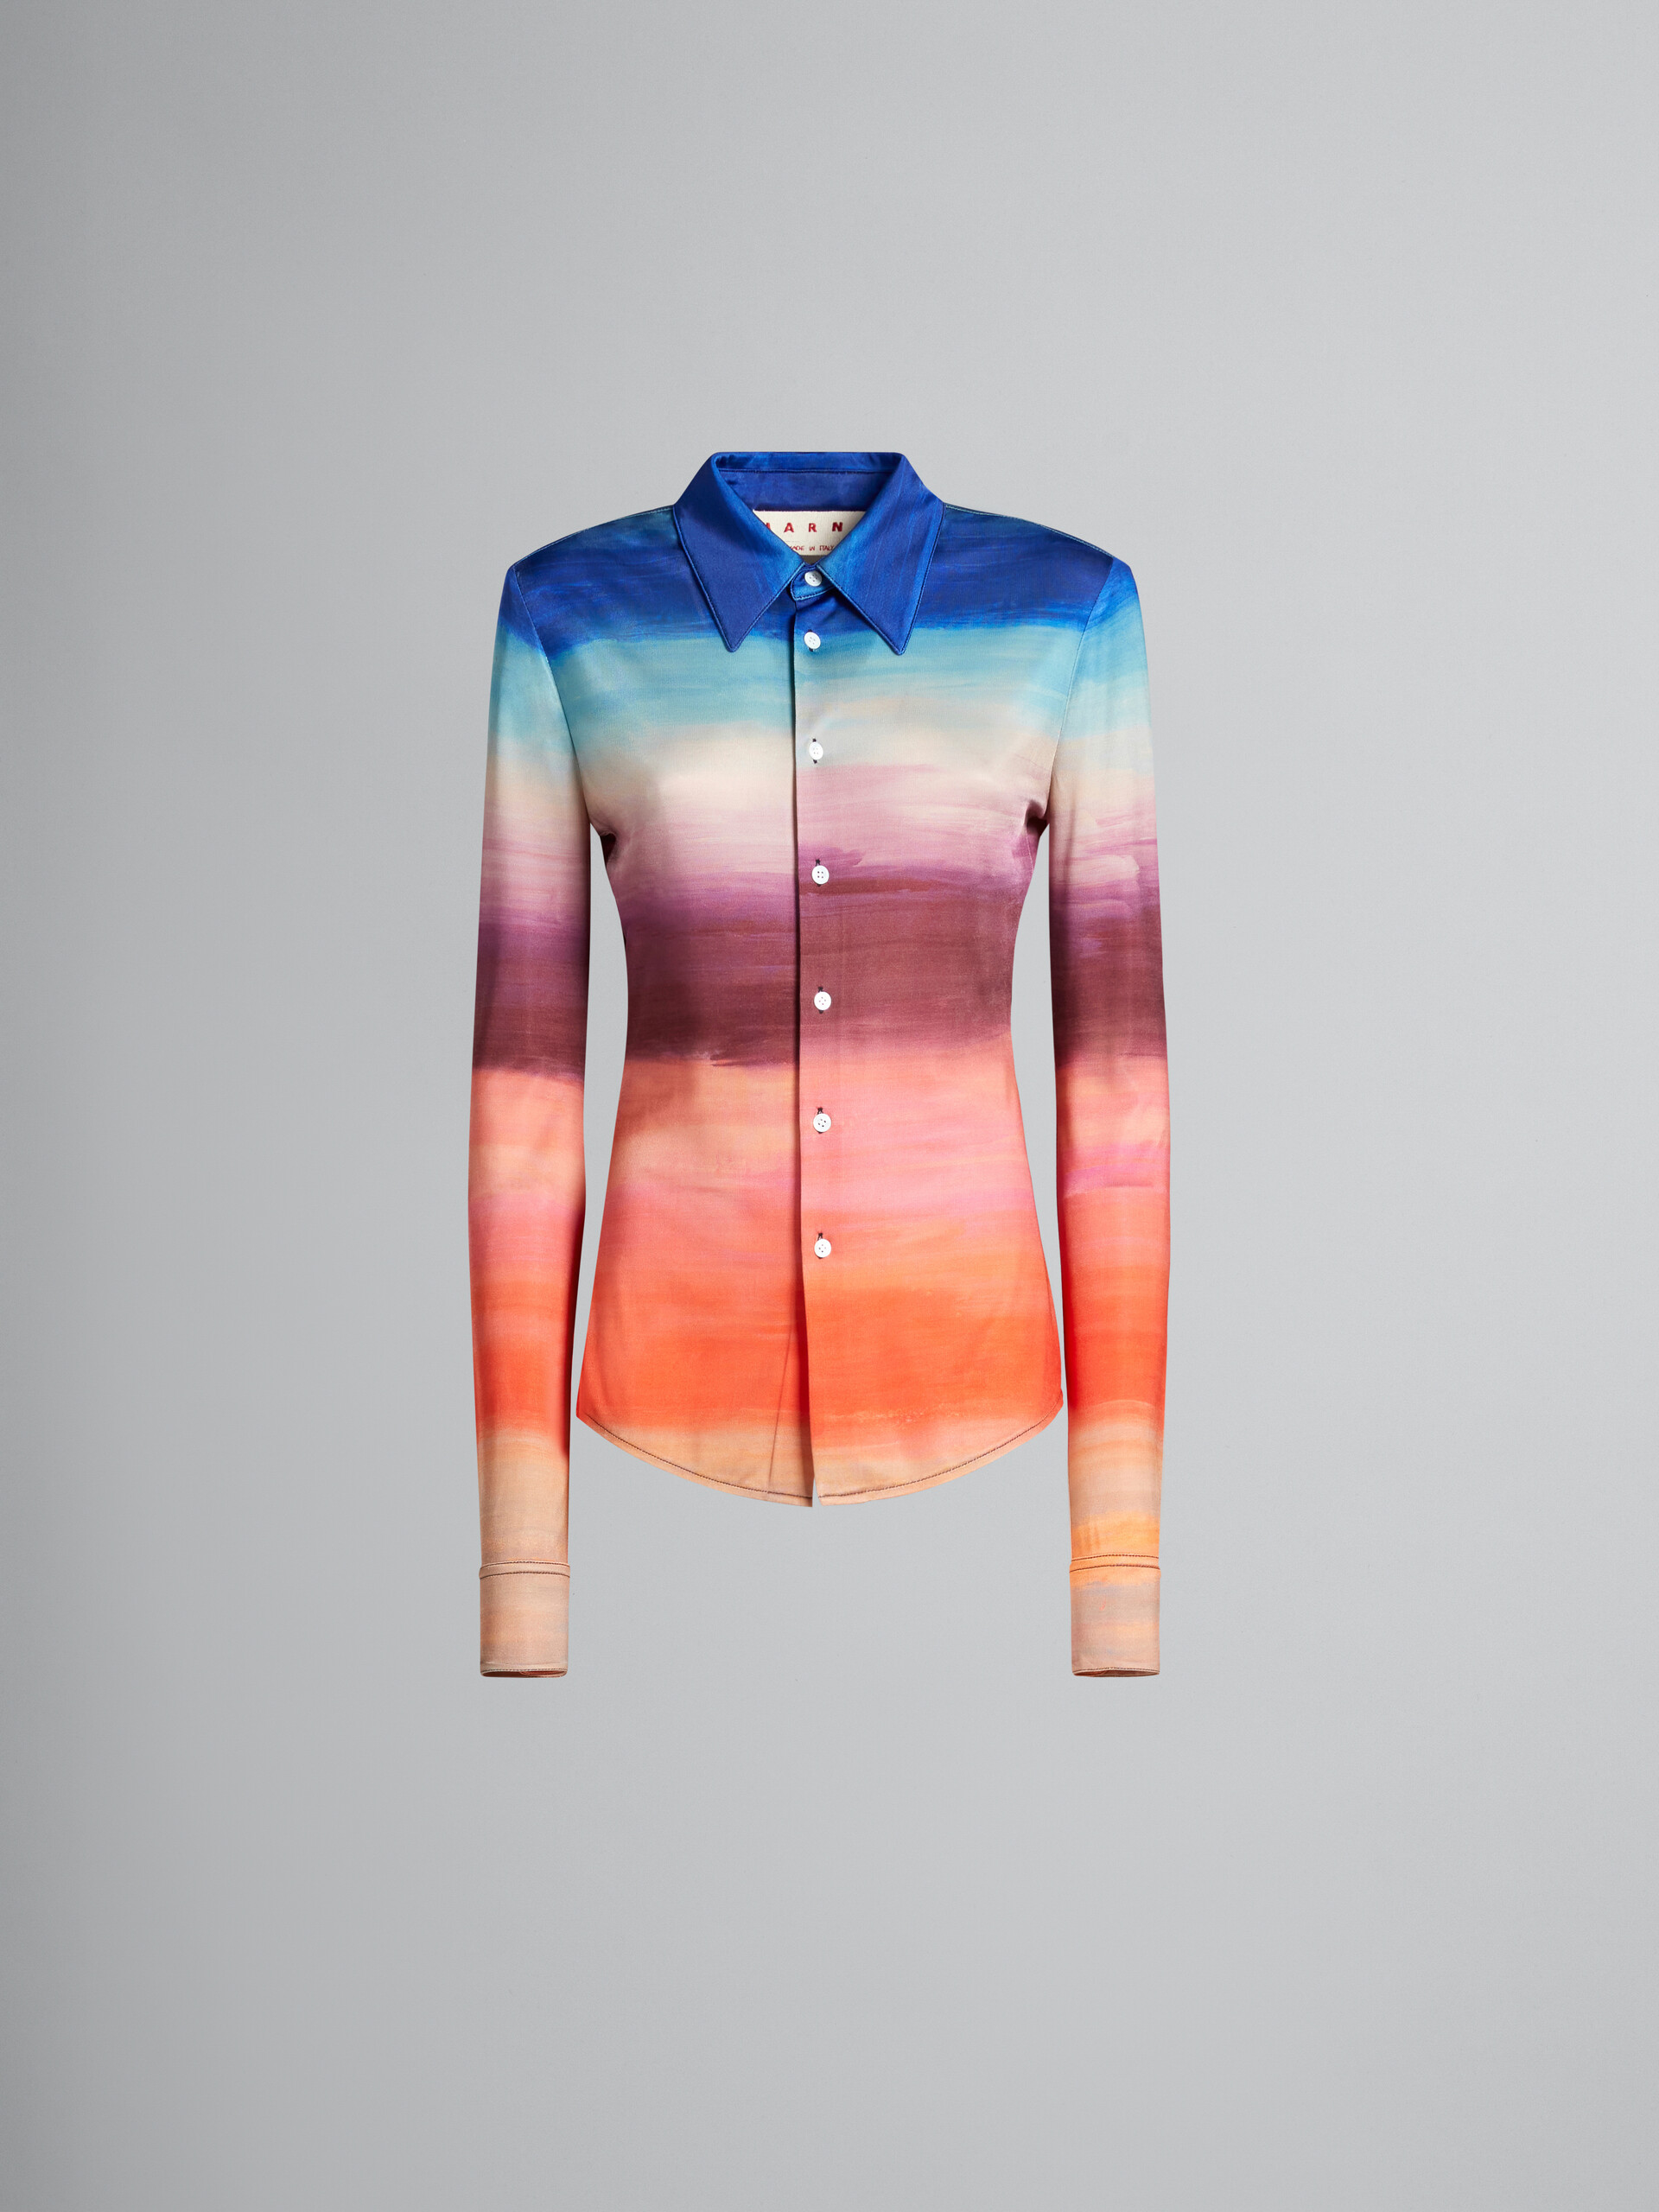 Multicoloured viscose jersey shirt with Dark Side of the Moon print - Shirts - Image 1